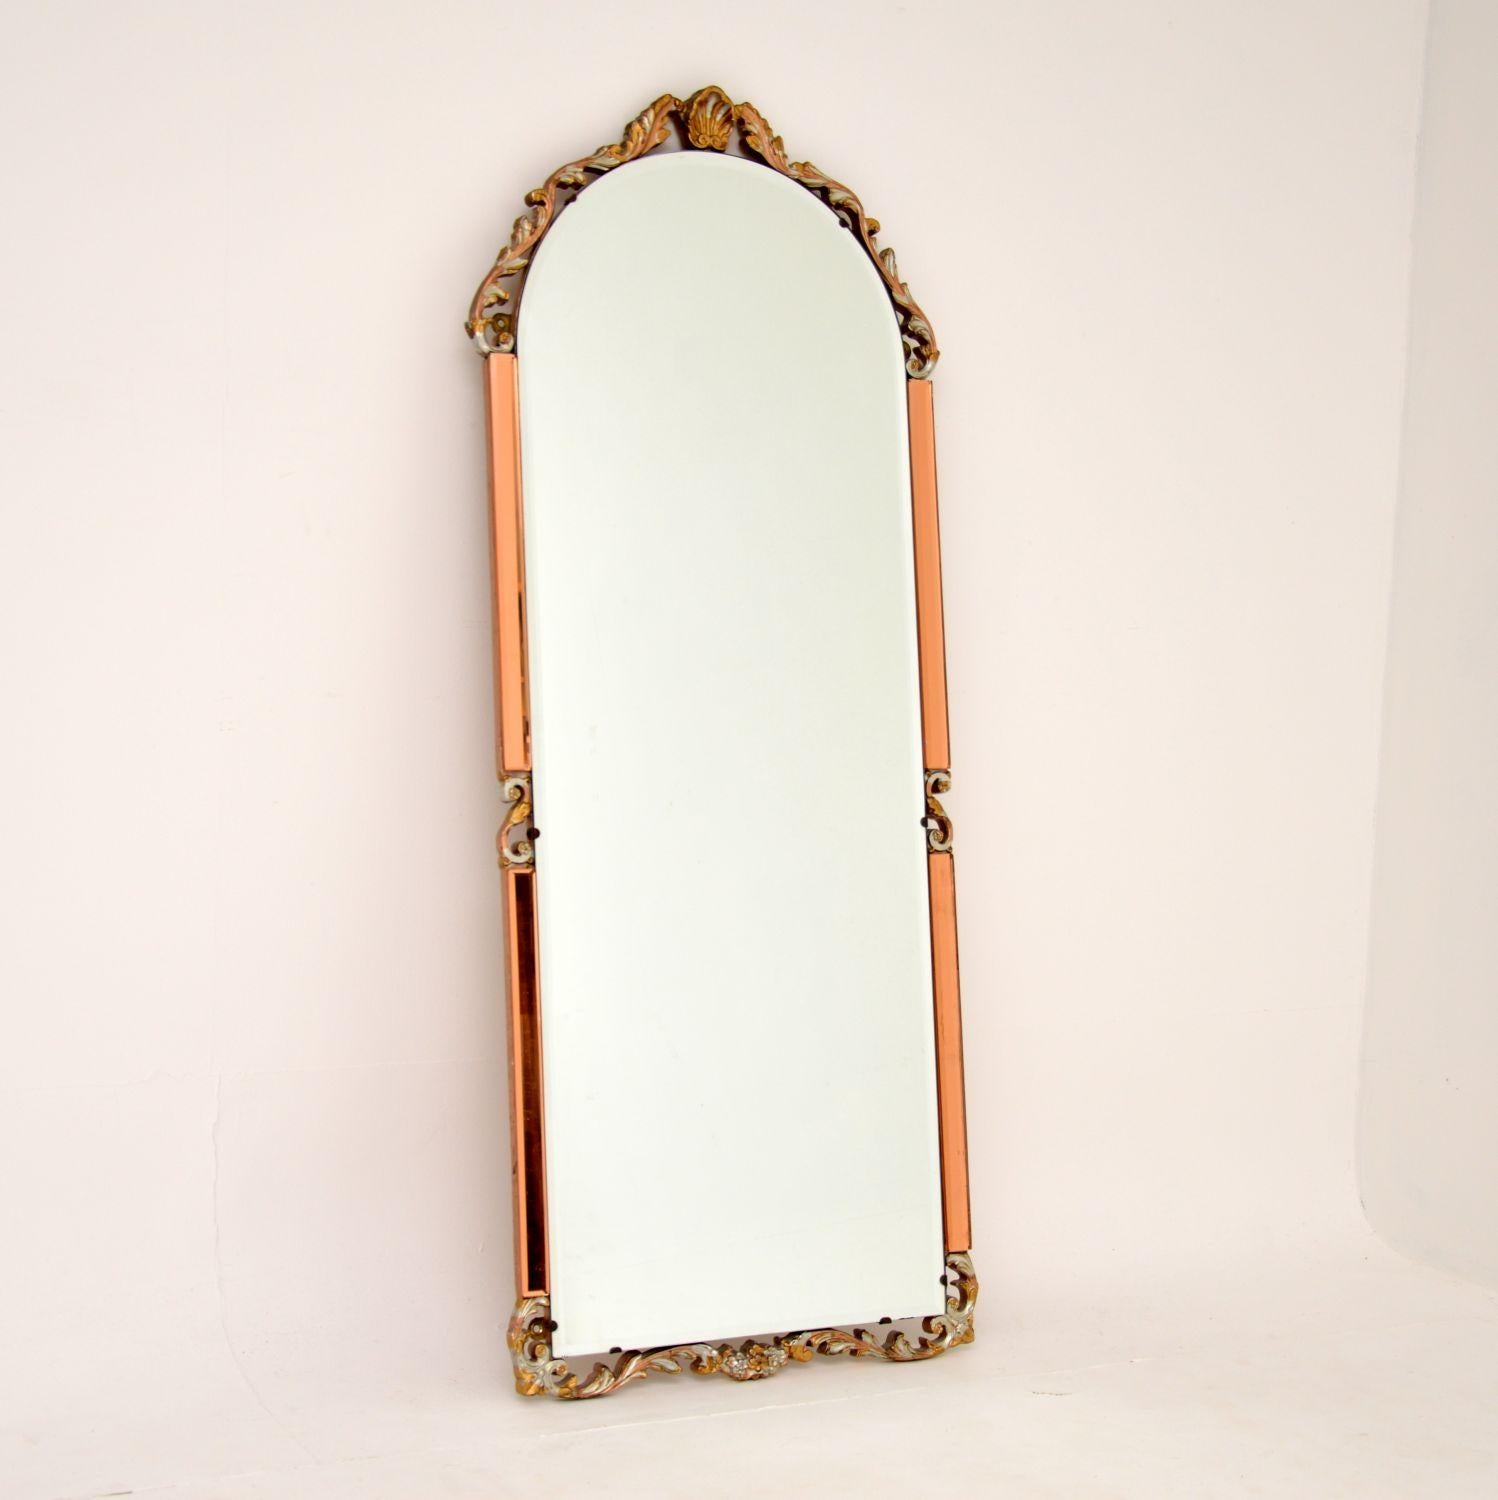 A beautiful and interesting antique mirror made from clear and peach beveled glass. This was made in England, it dates from around the 1930’s period.

It is from the Art Deco period and is an interesting mix of styles. The peach and clear glass